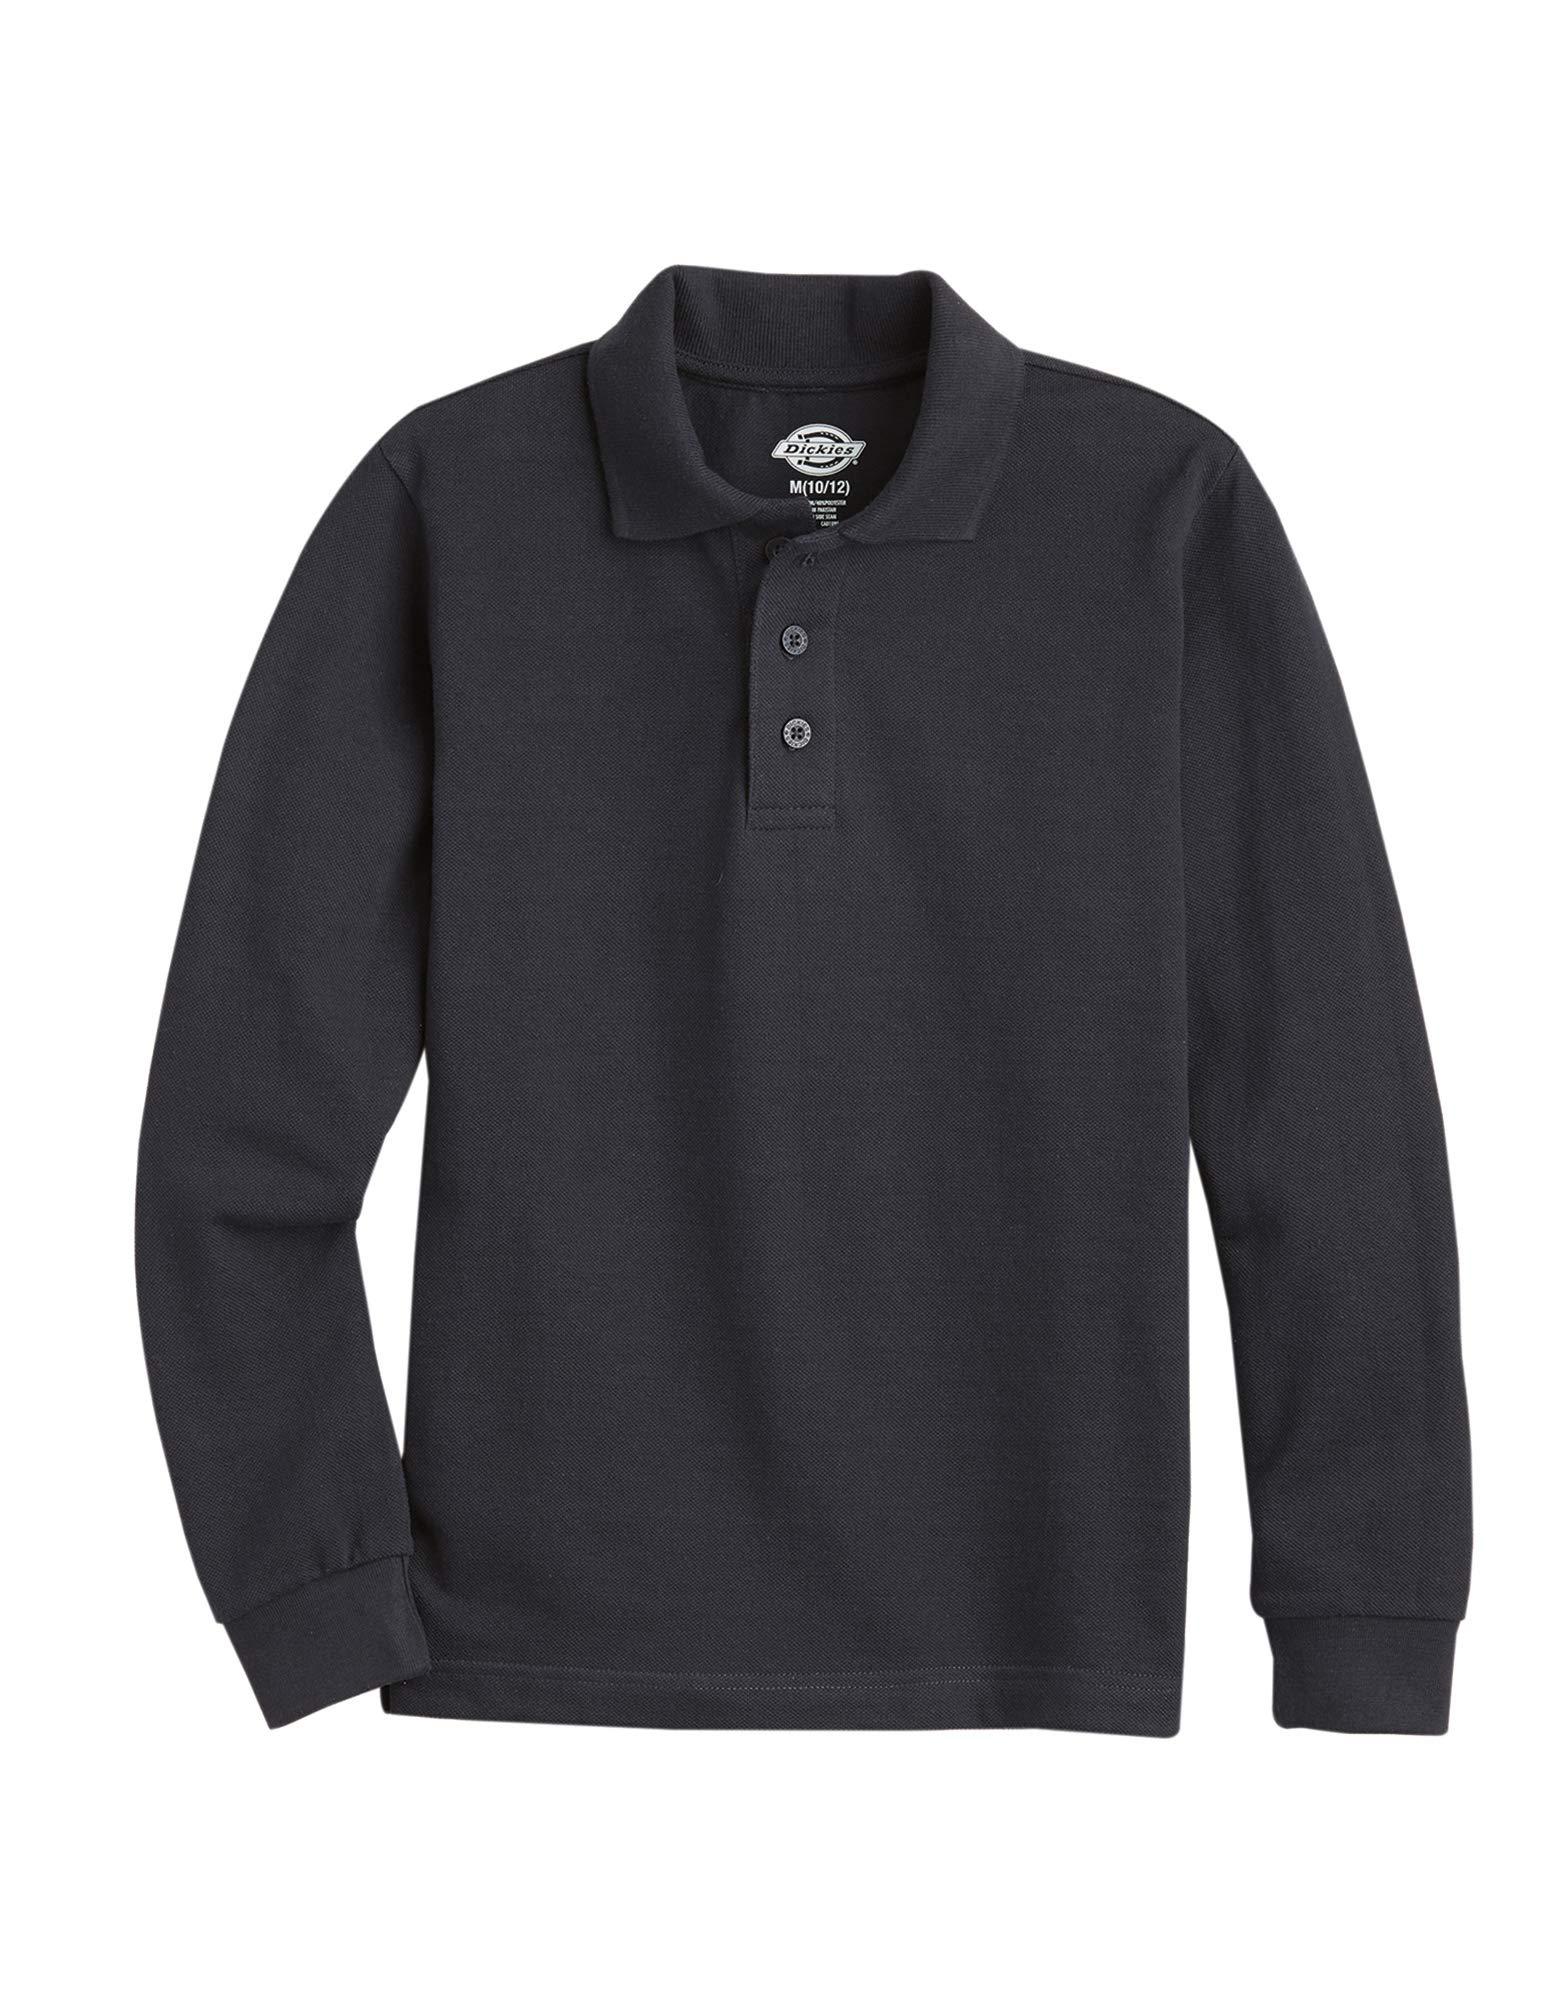 Dickies Long Sleeve Pique Polo in Black for Men - Lyst